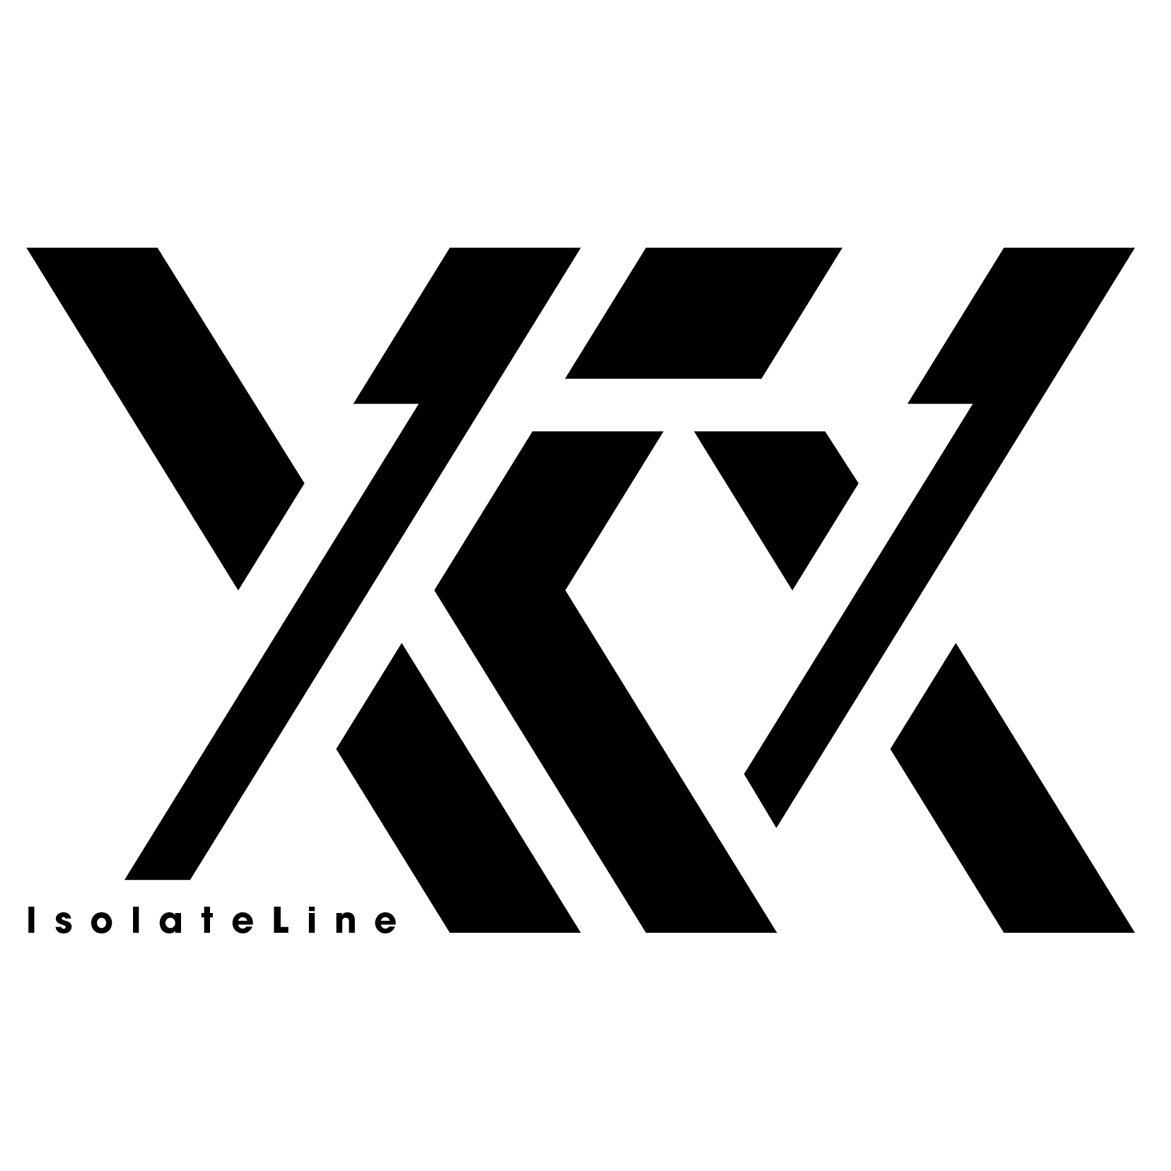 XiX［sáiks］ is a Music Label. Organized by @IsolateLine
The word  expresses i（individual = solitary) between X (crossing line) and X.